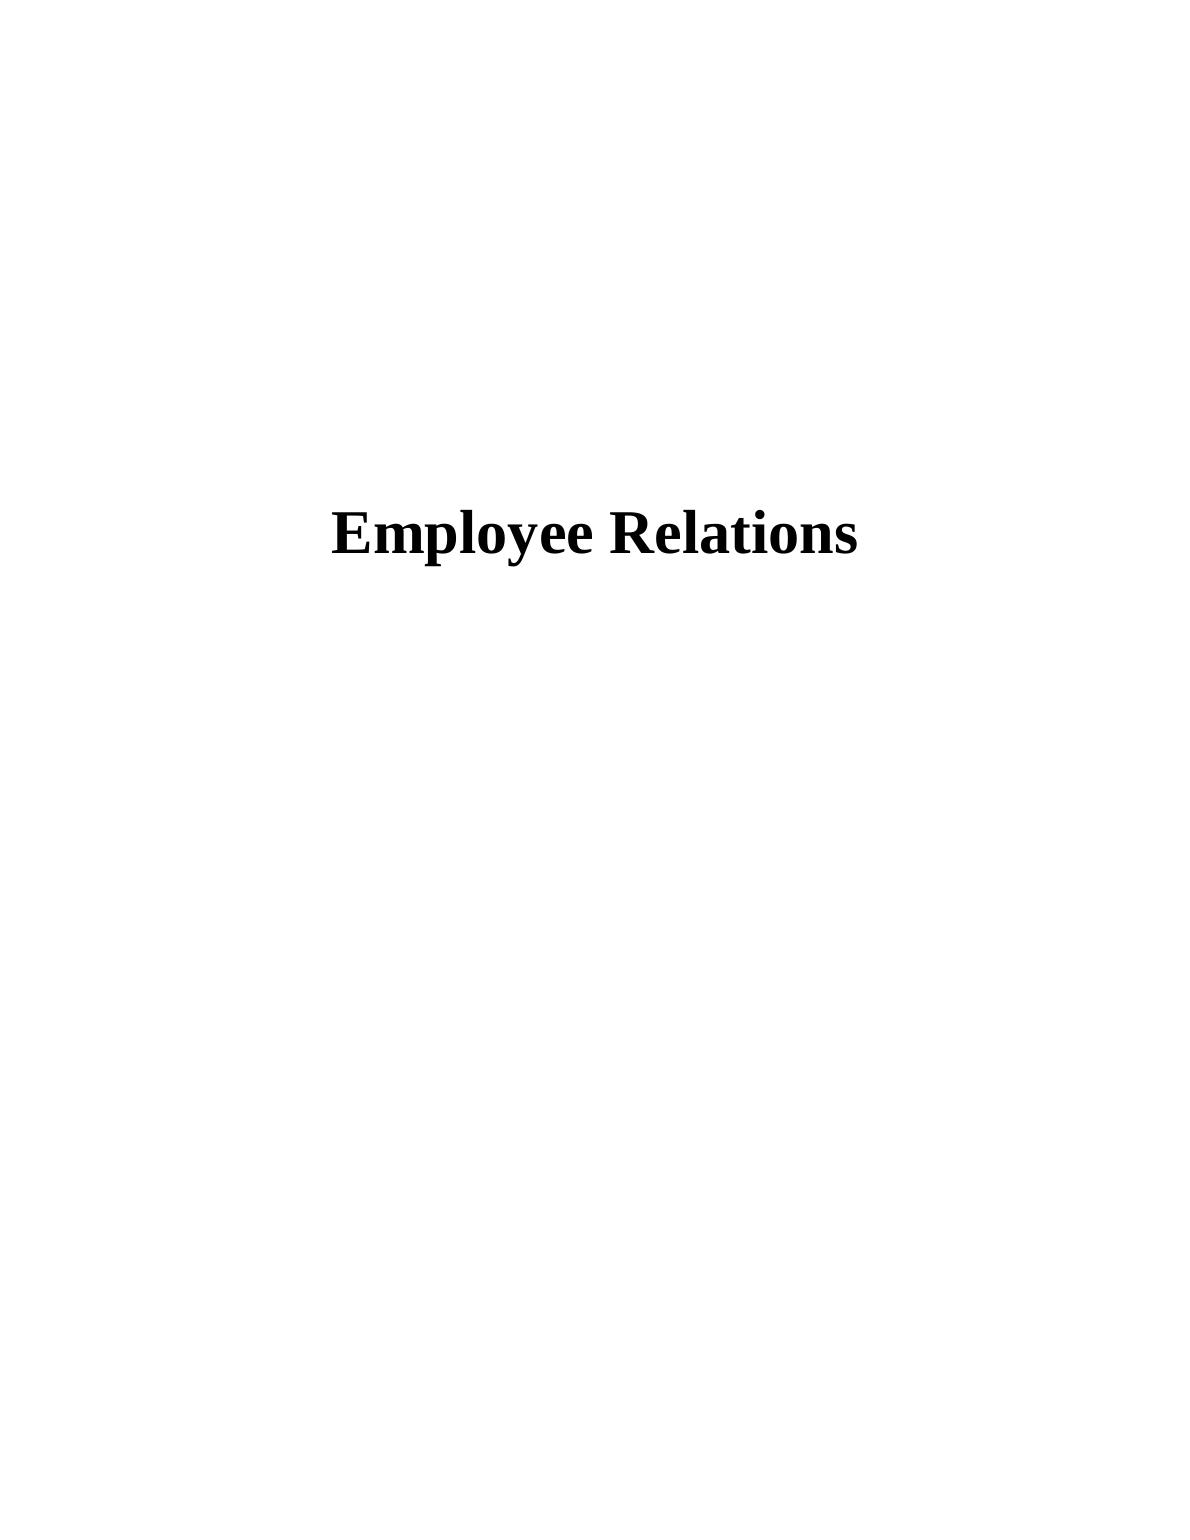 Employee Relations: Importance, Laws, Rights, Duties, and Obligations_1